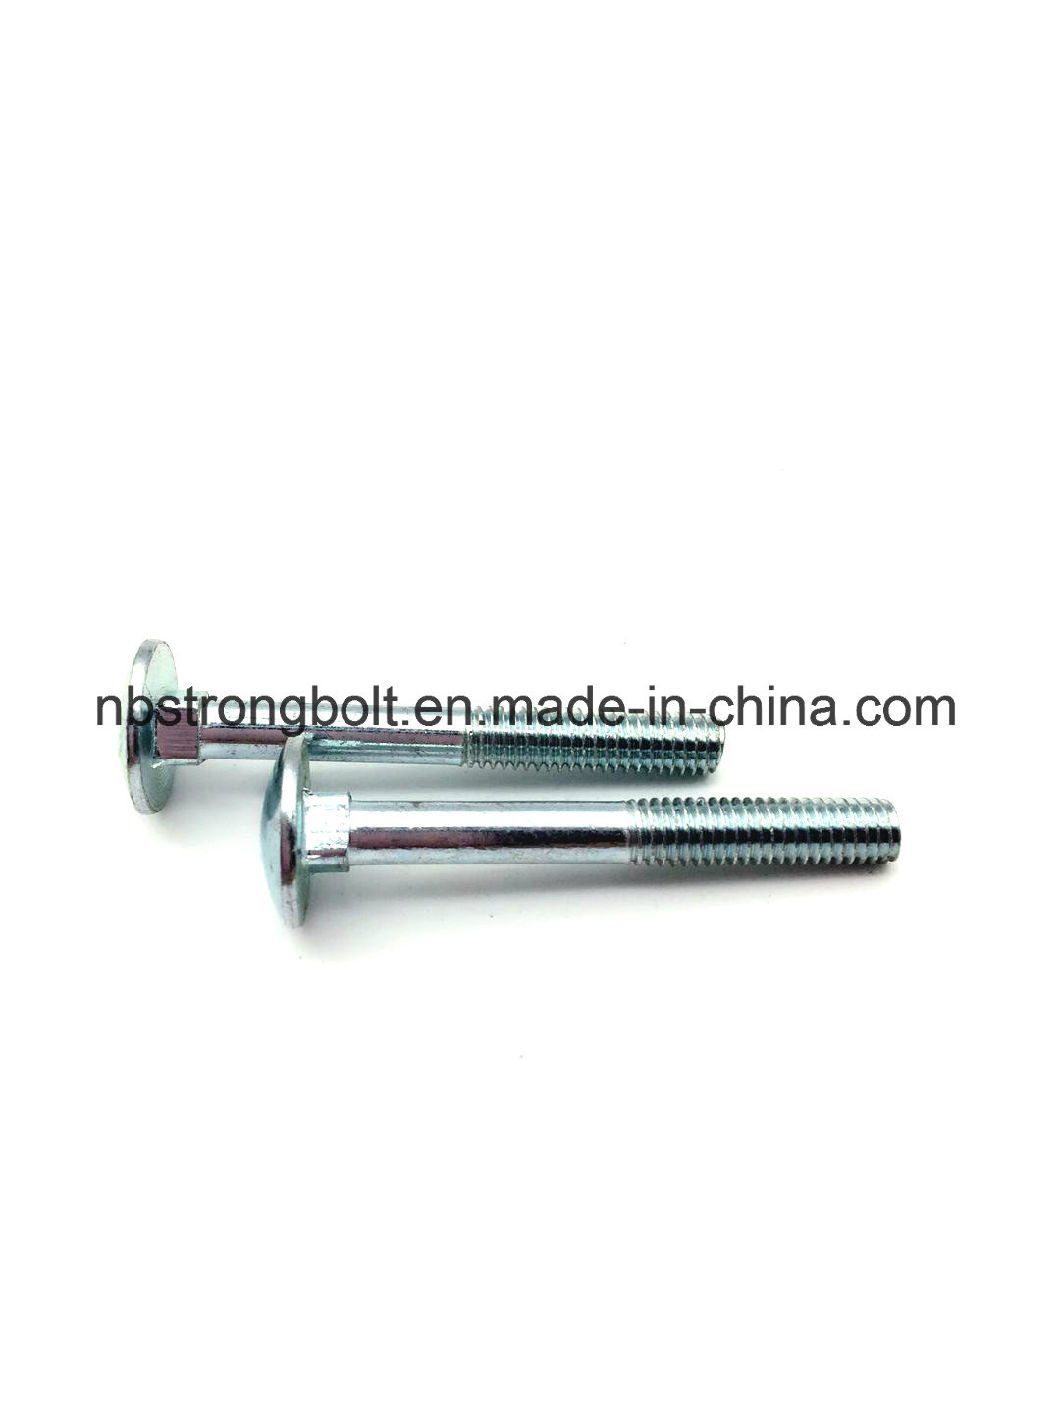 DIN603 Mushroom Head Square Neck Bolt with Cl. 4.8